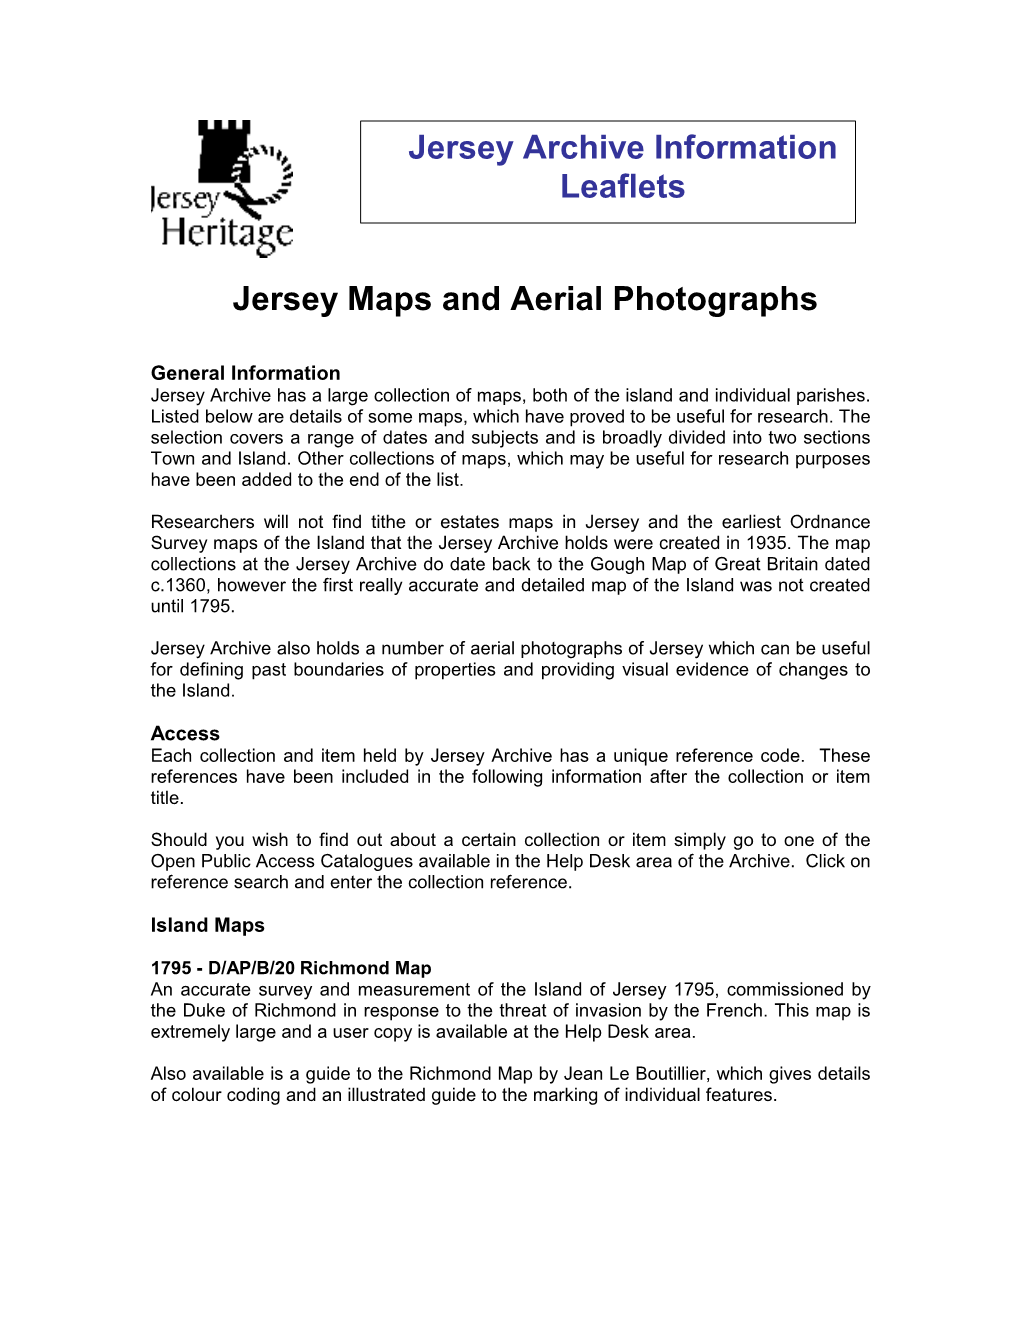 Jersey Maps and Aerial Photographs Jersey Archive Information Leaflets